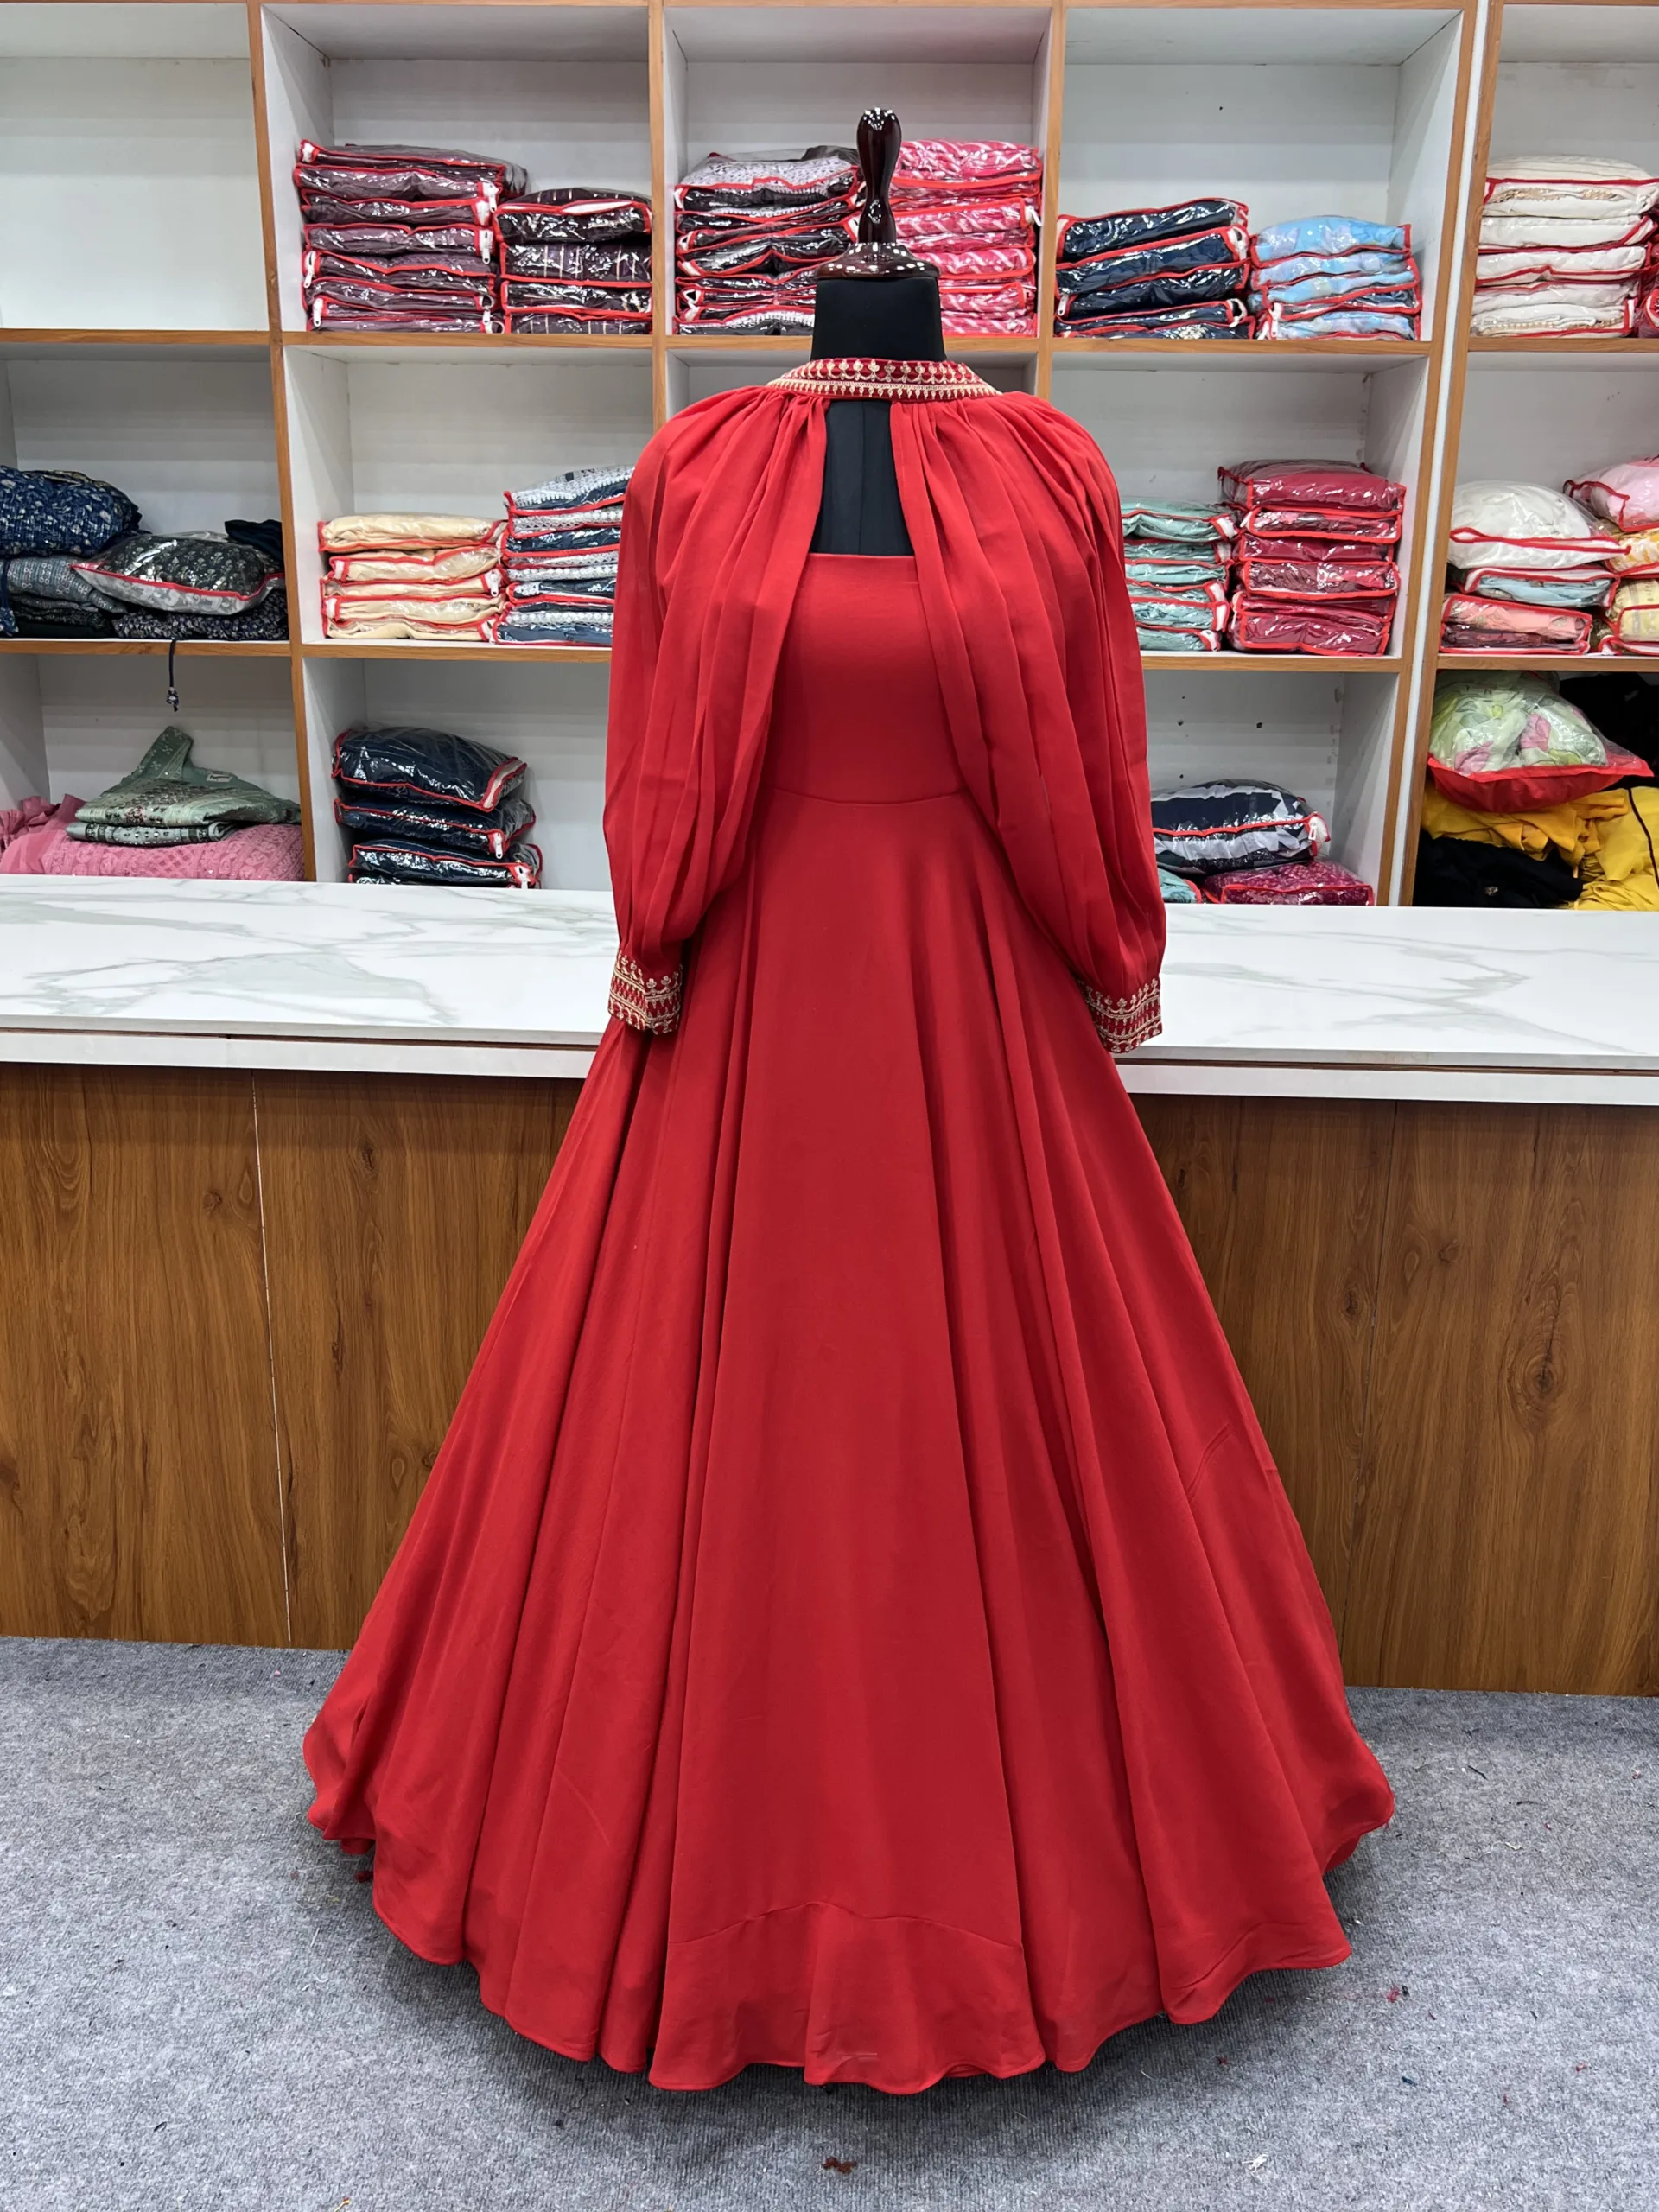 Extravagant red satin ball gown wedding/prom dress with red flower and  glitter details